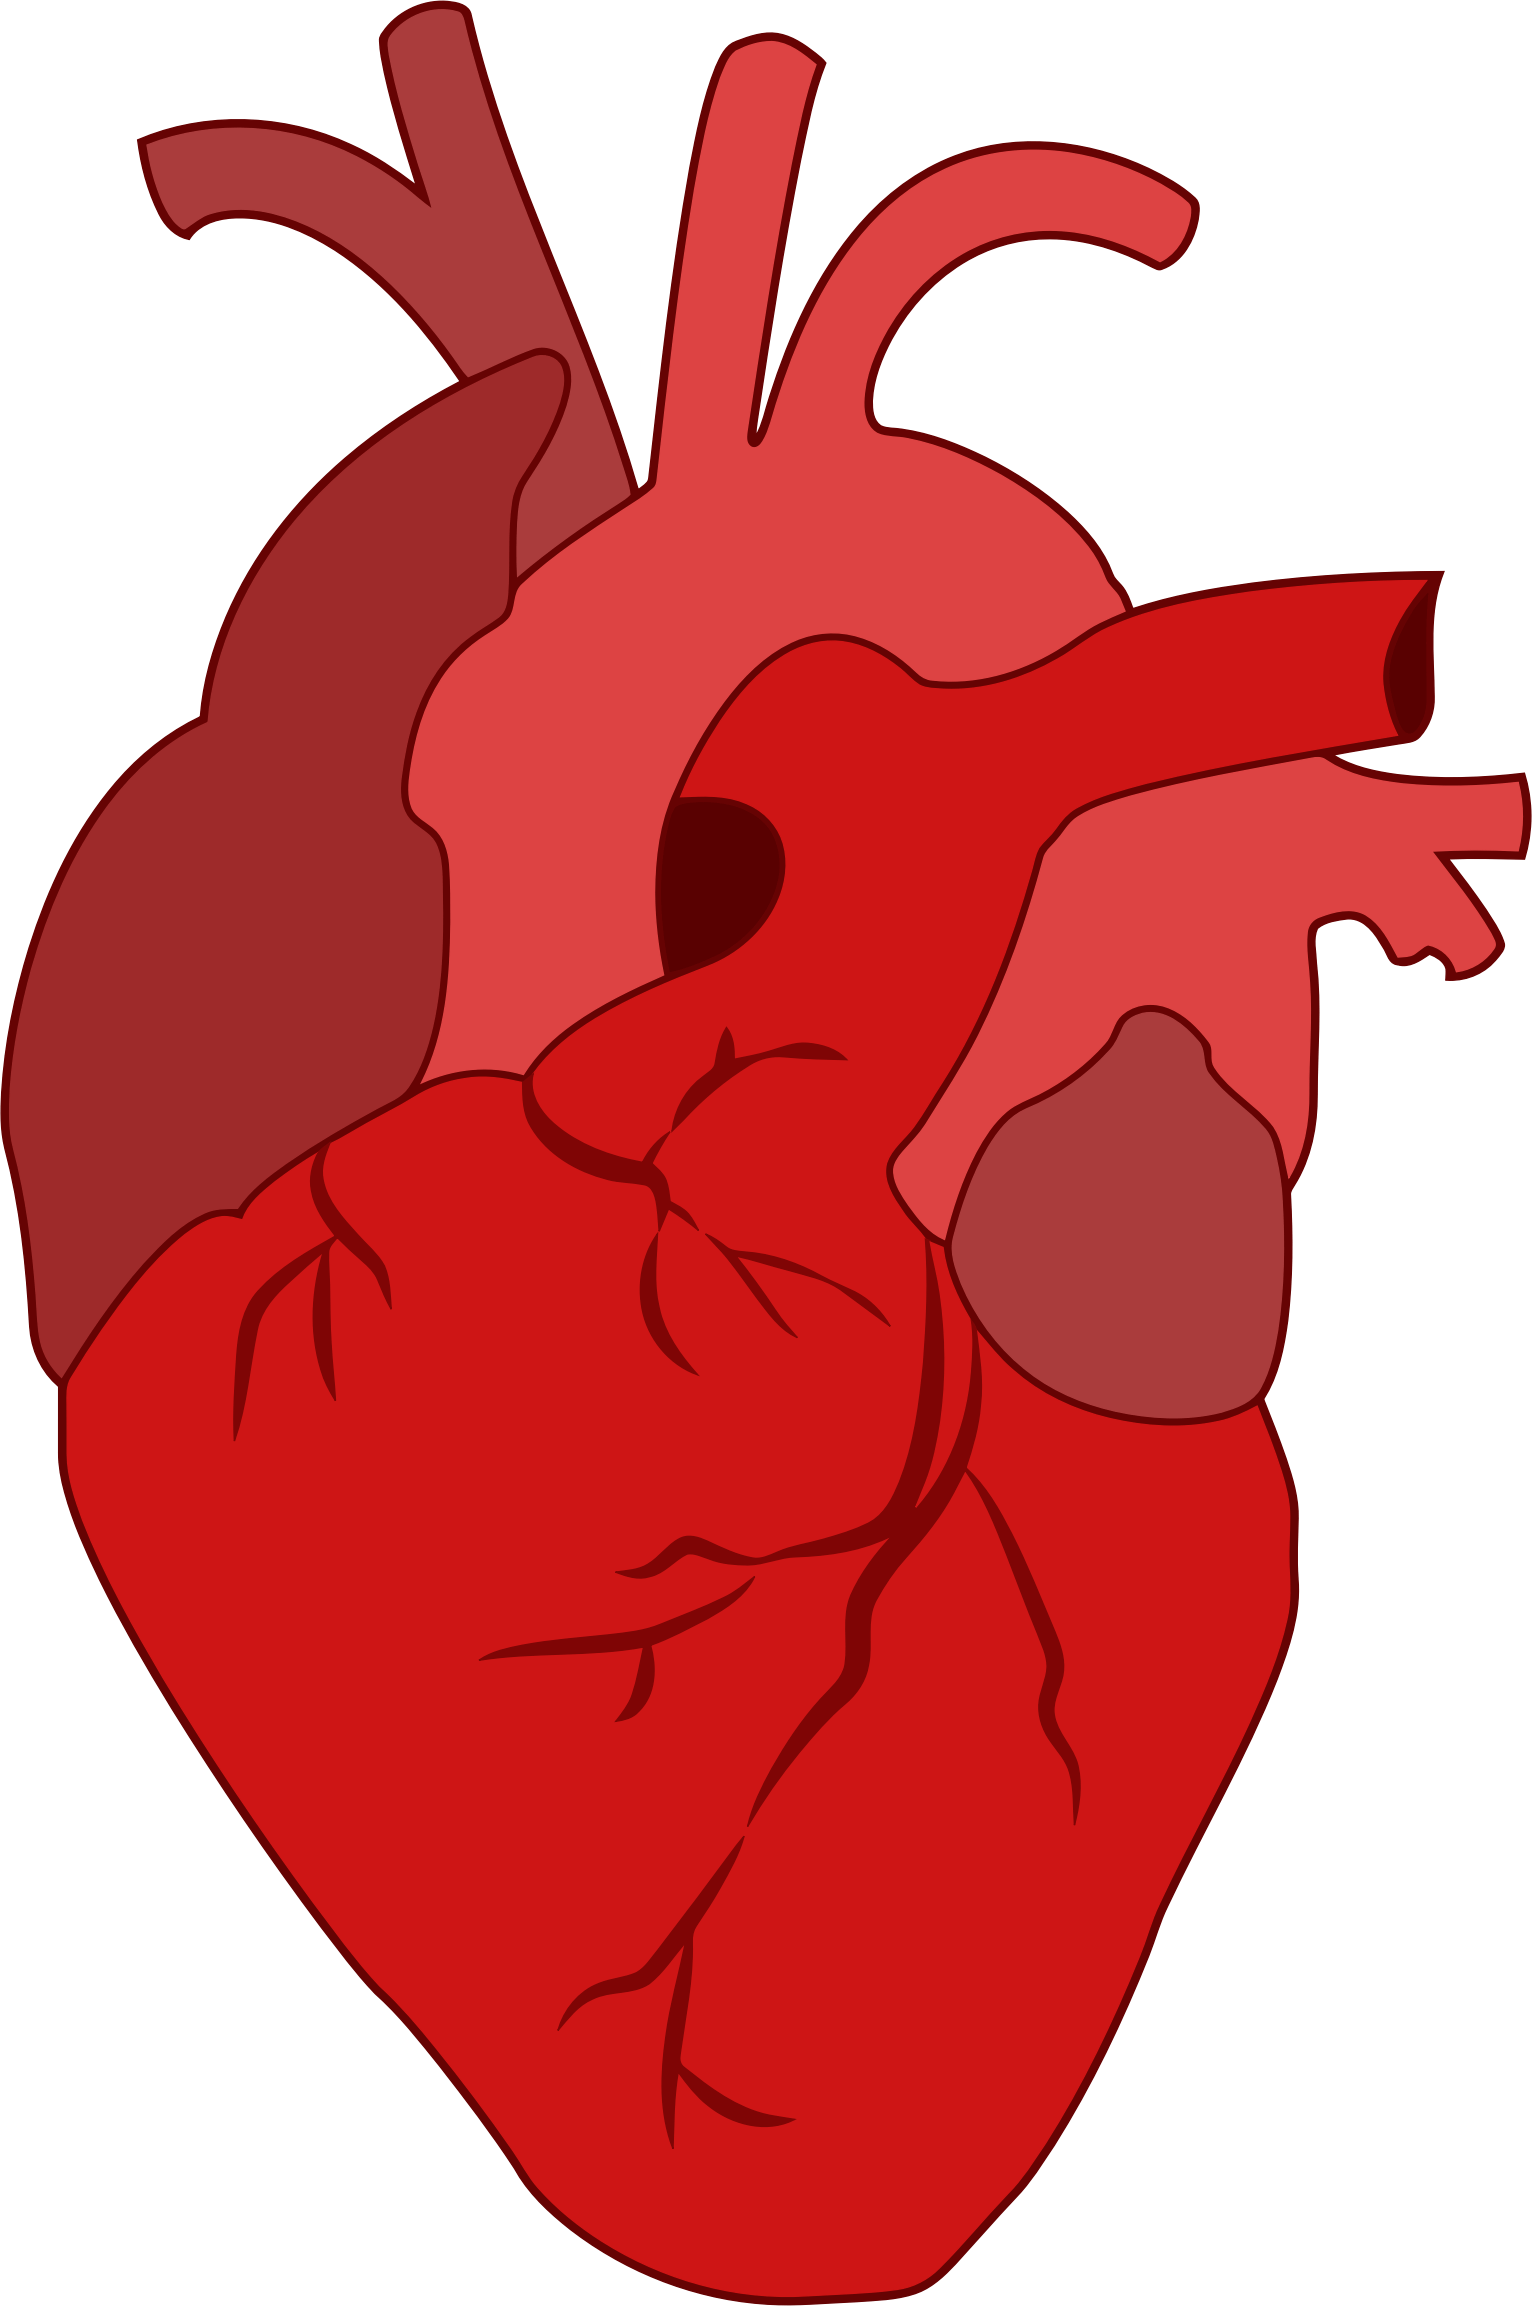 real heart png - Real Heart Clipart - Heart | #1177487 - Vippng